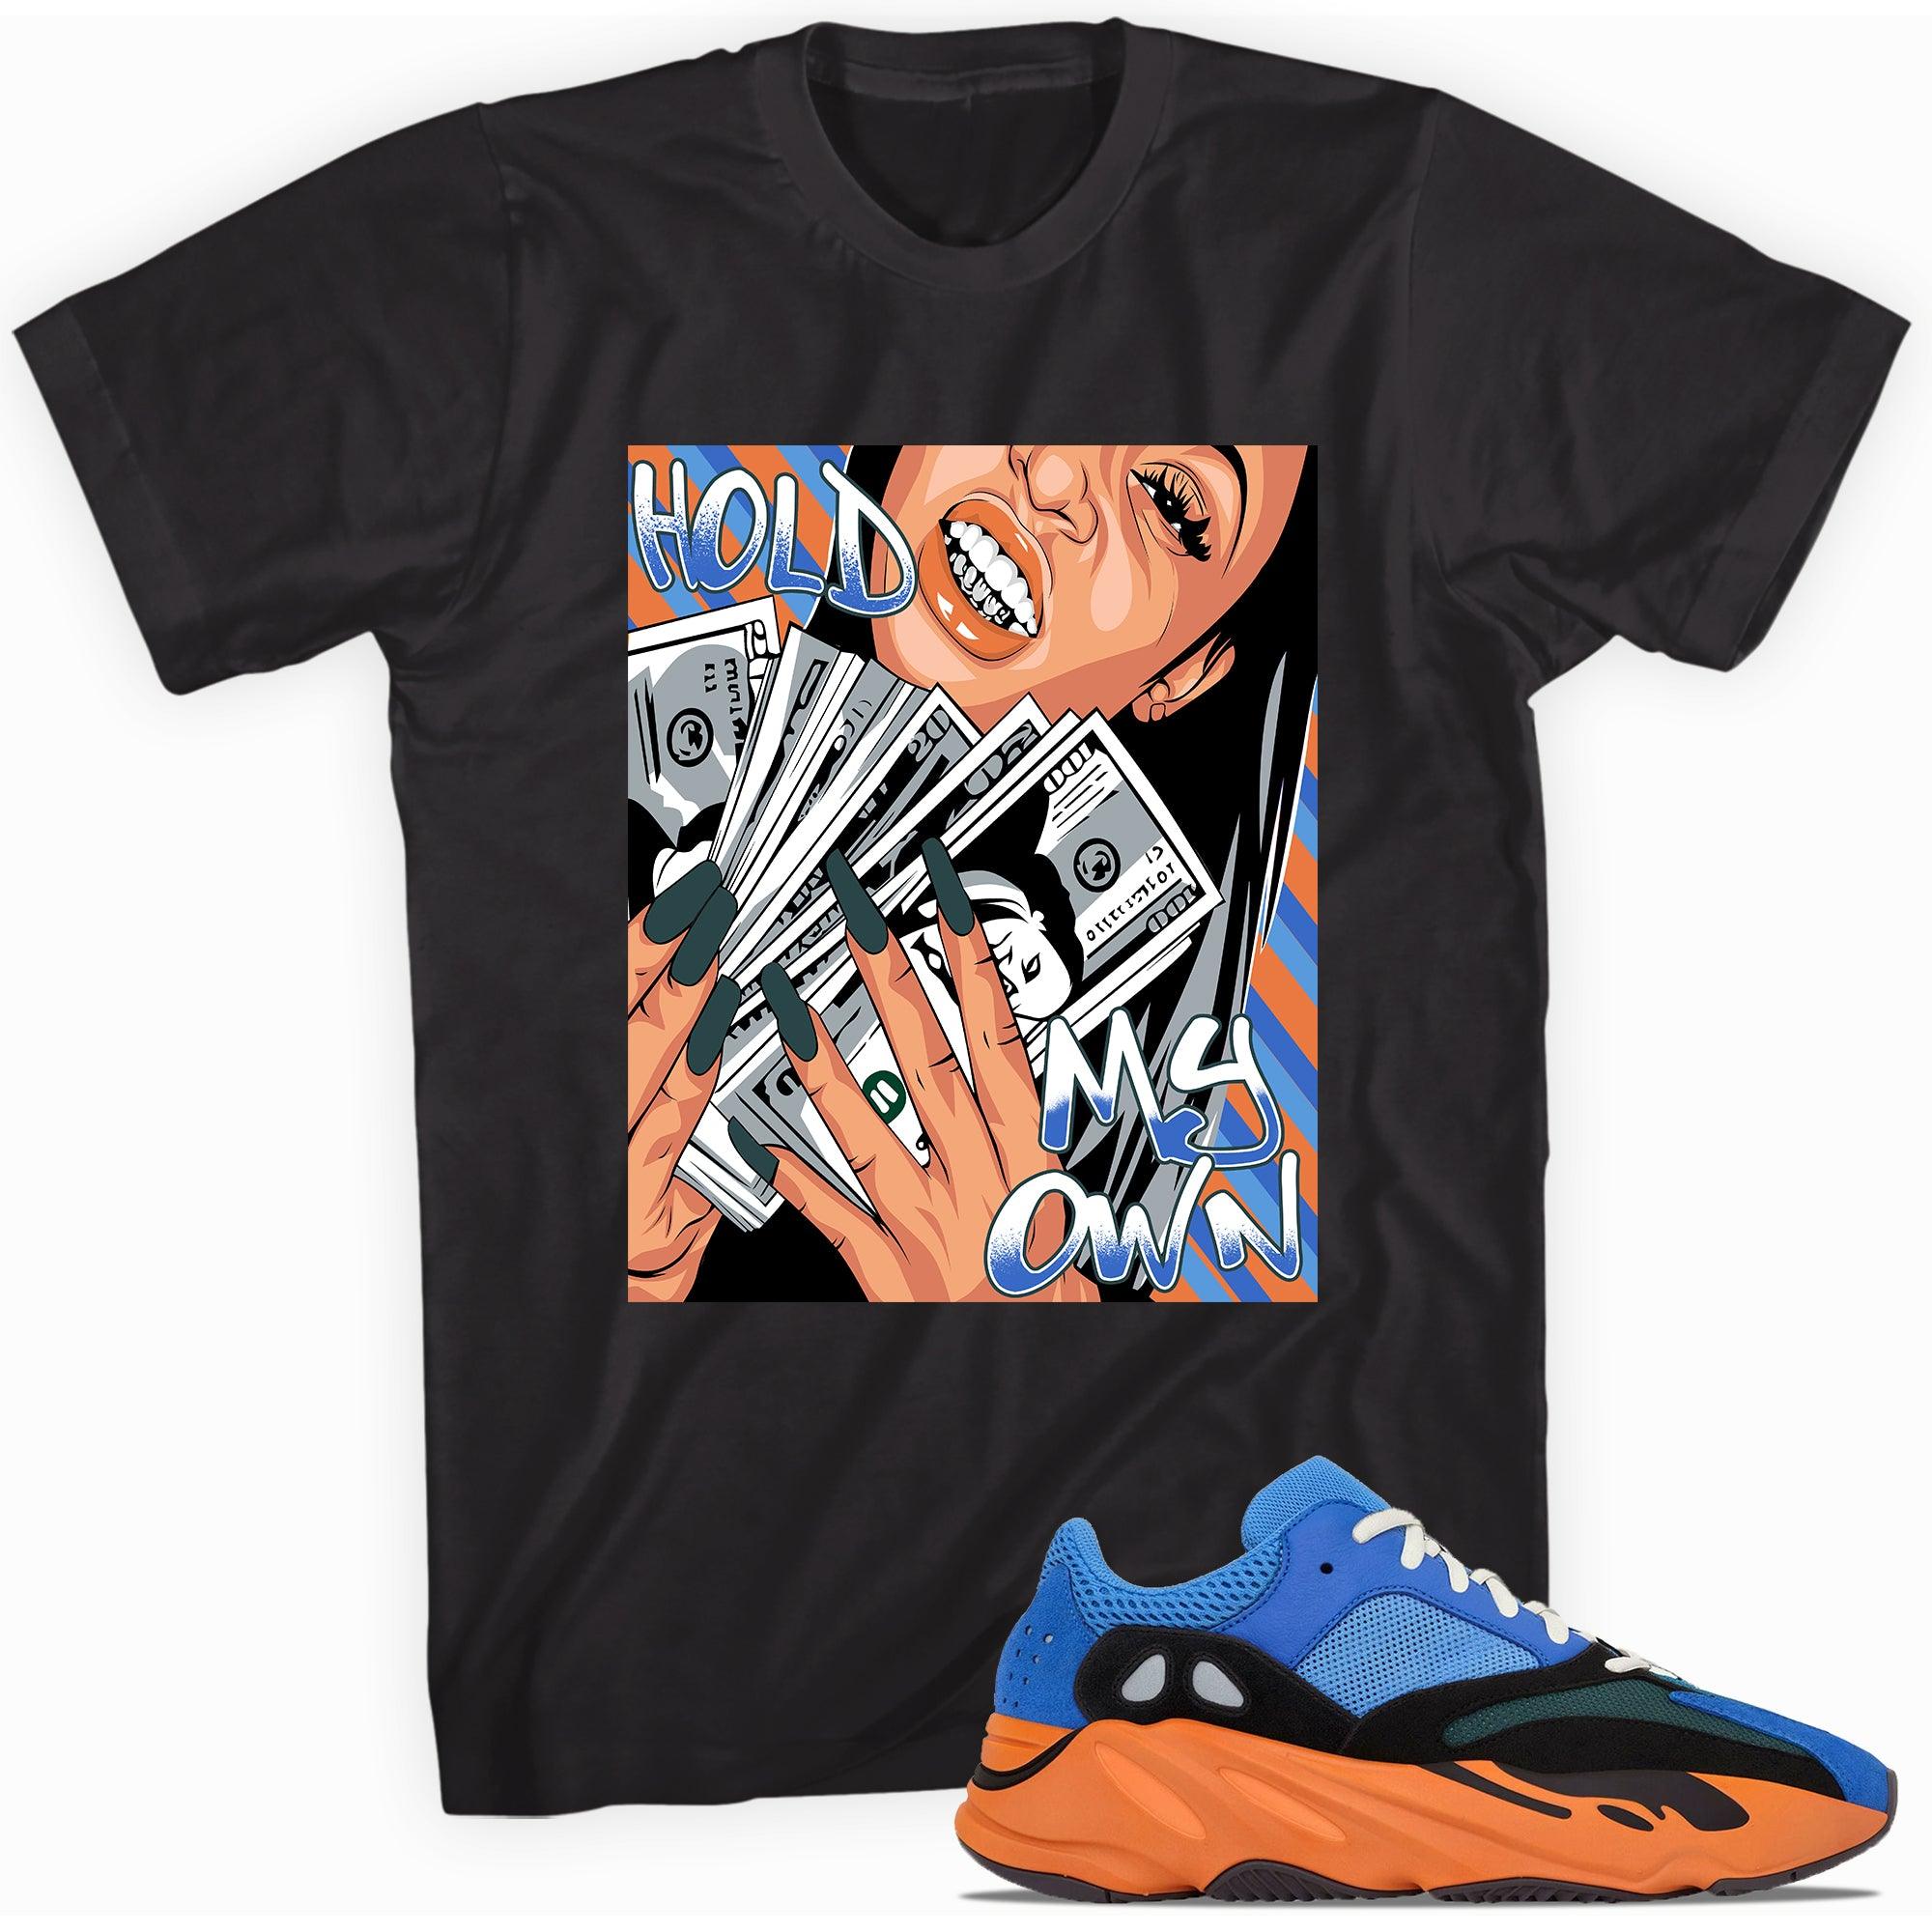 Black Hold My Own Shirt Yeezy Boost 700 Bright Blue photo